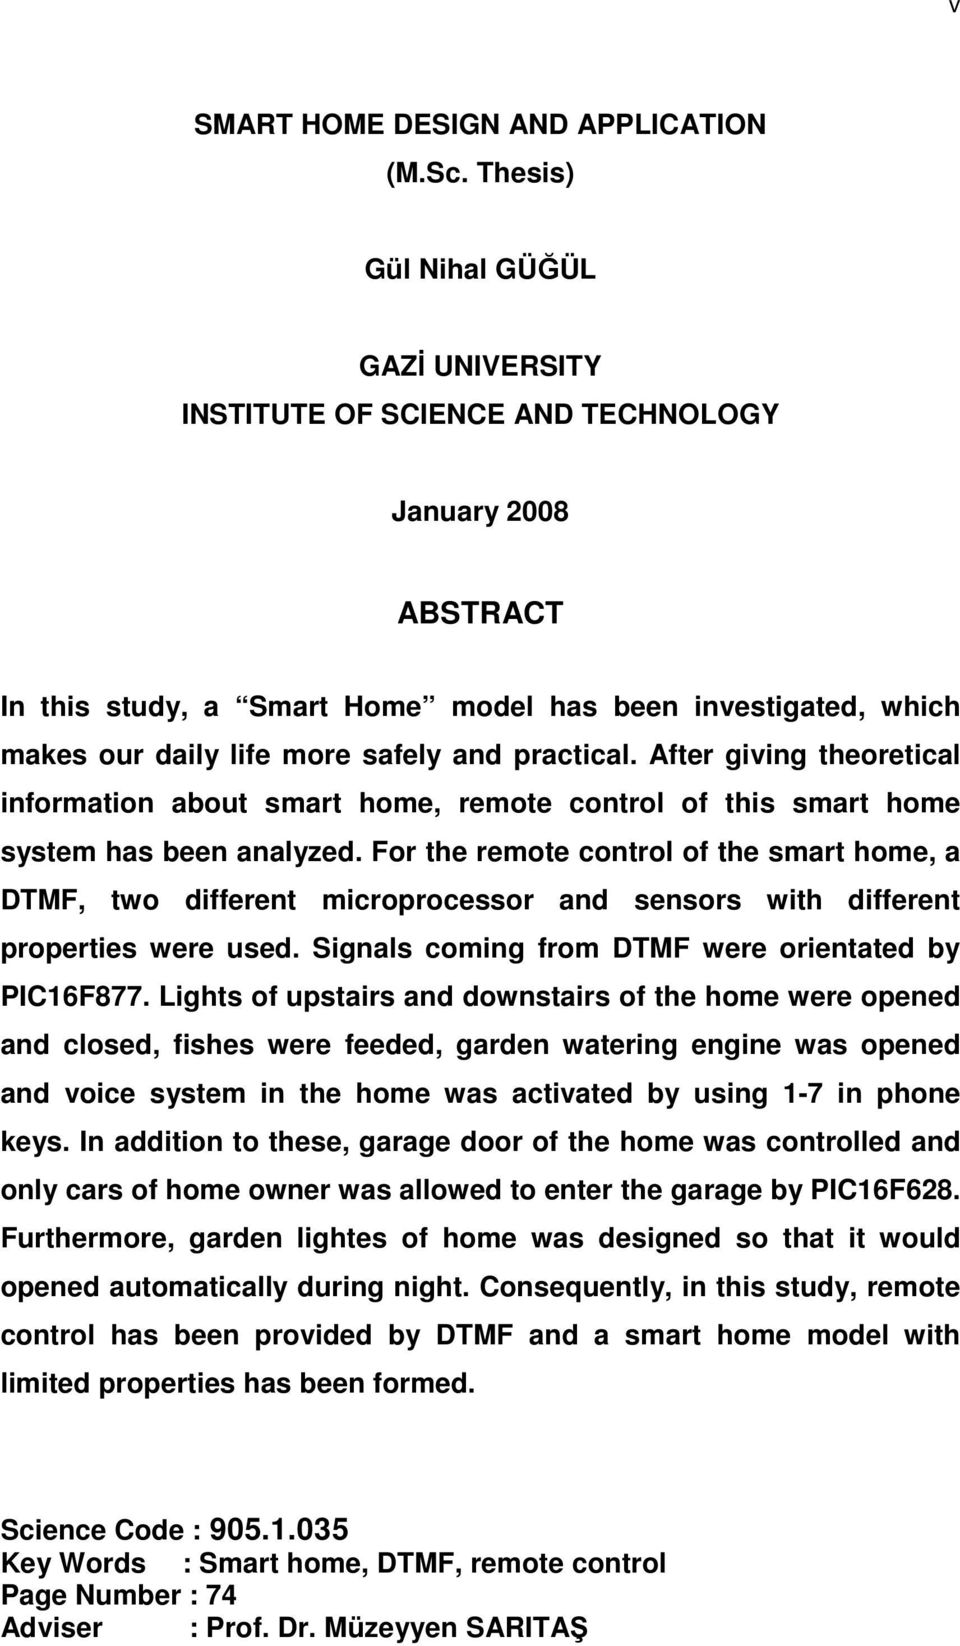 practical. After giving theoretical information about smart home, remote control of this smart home system has been analyzed.